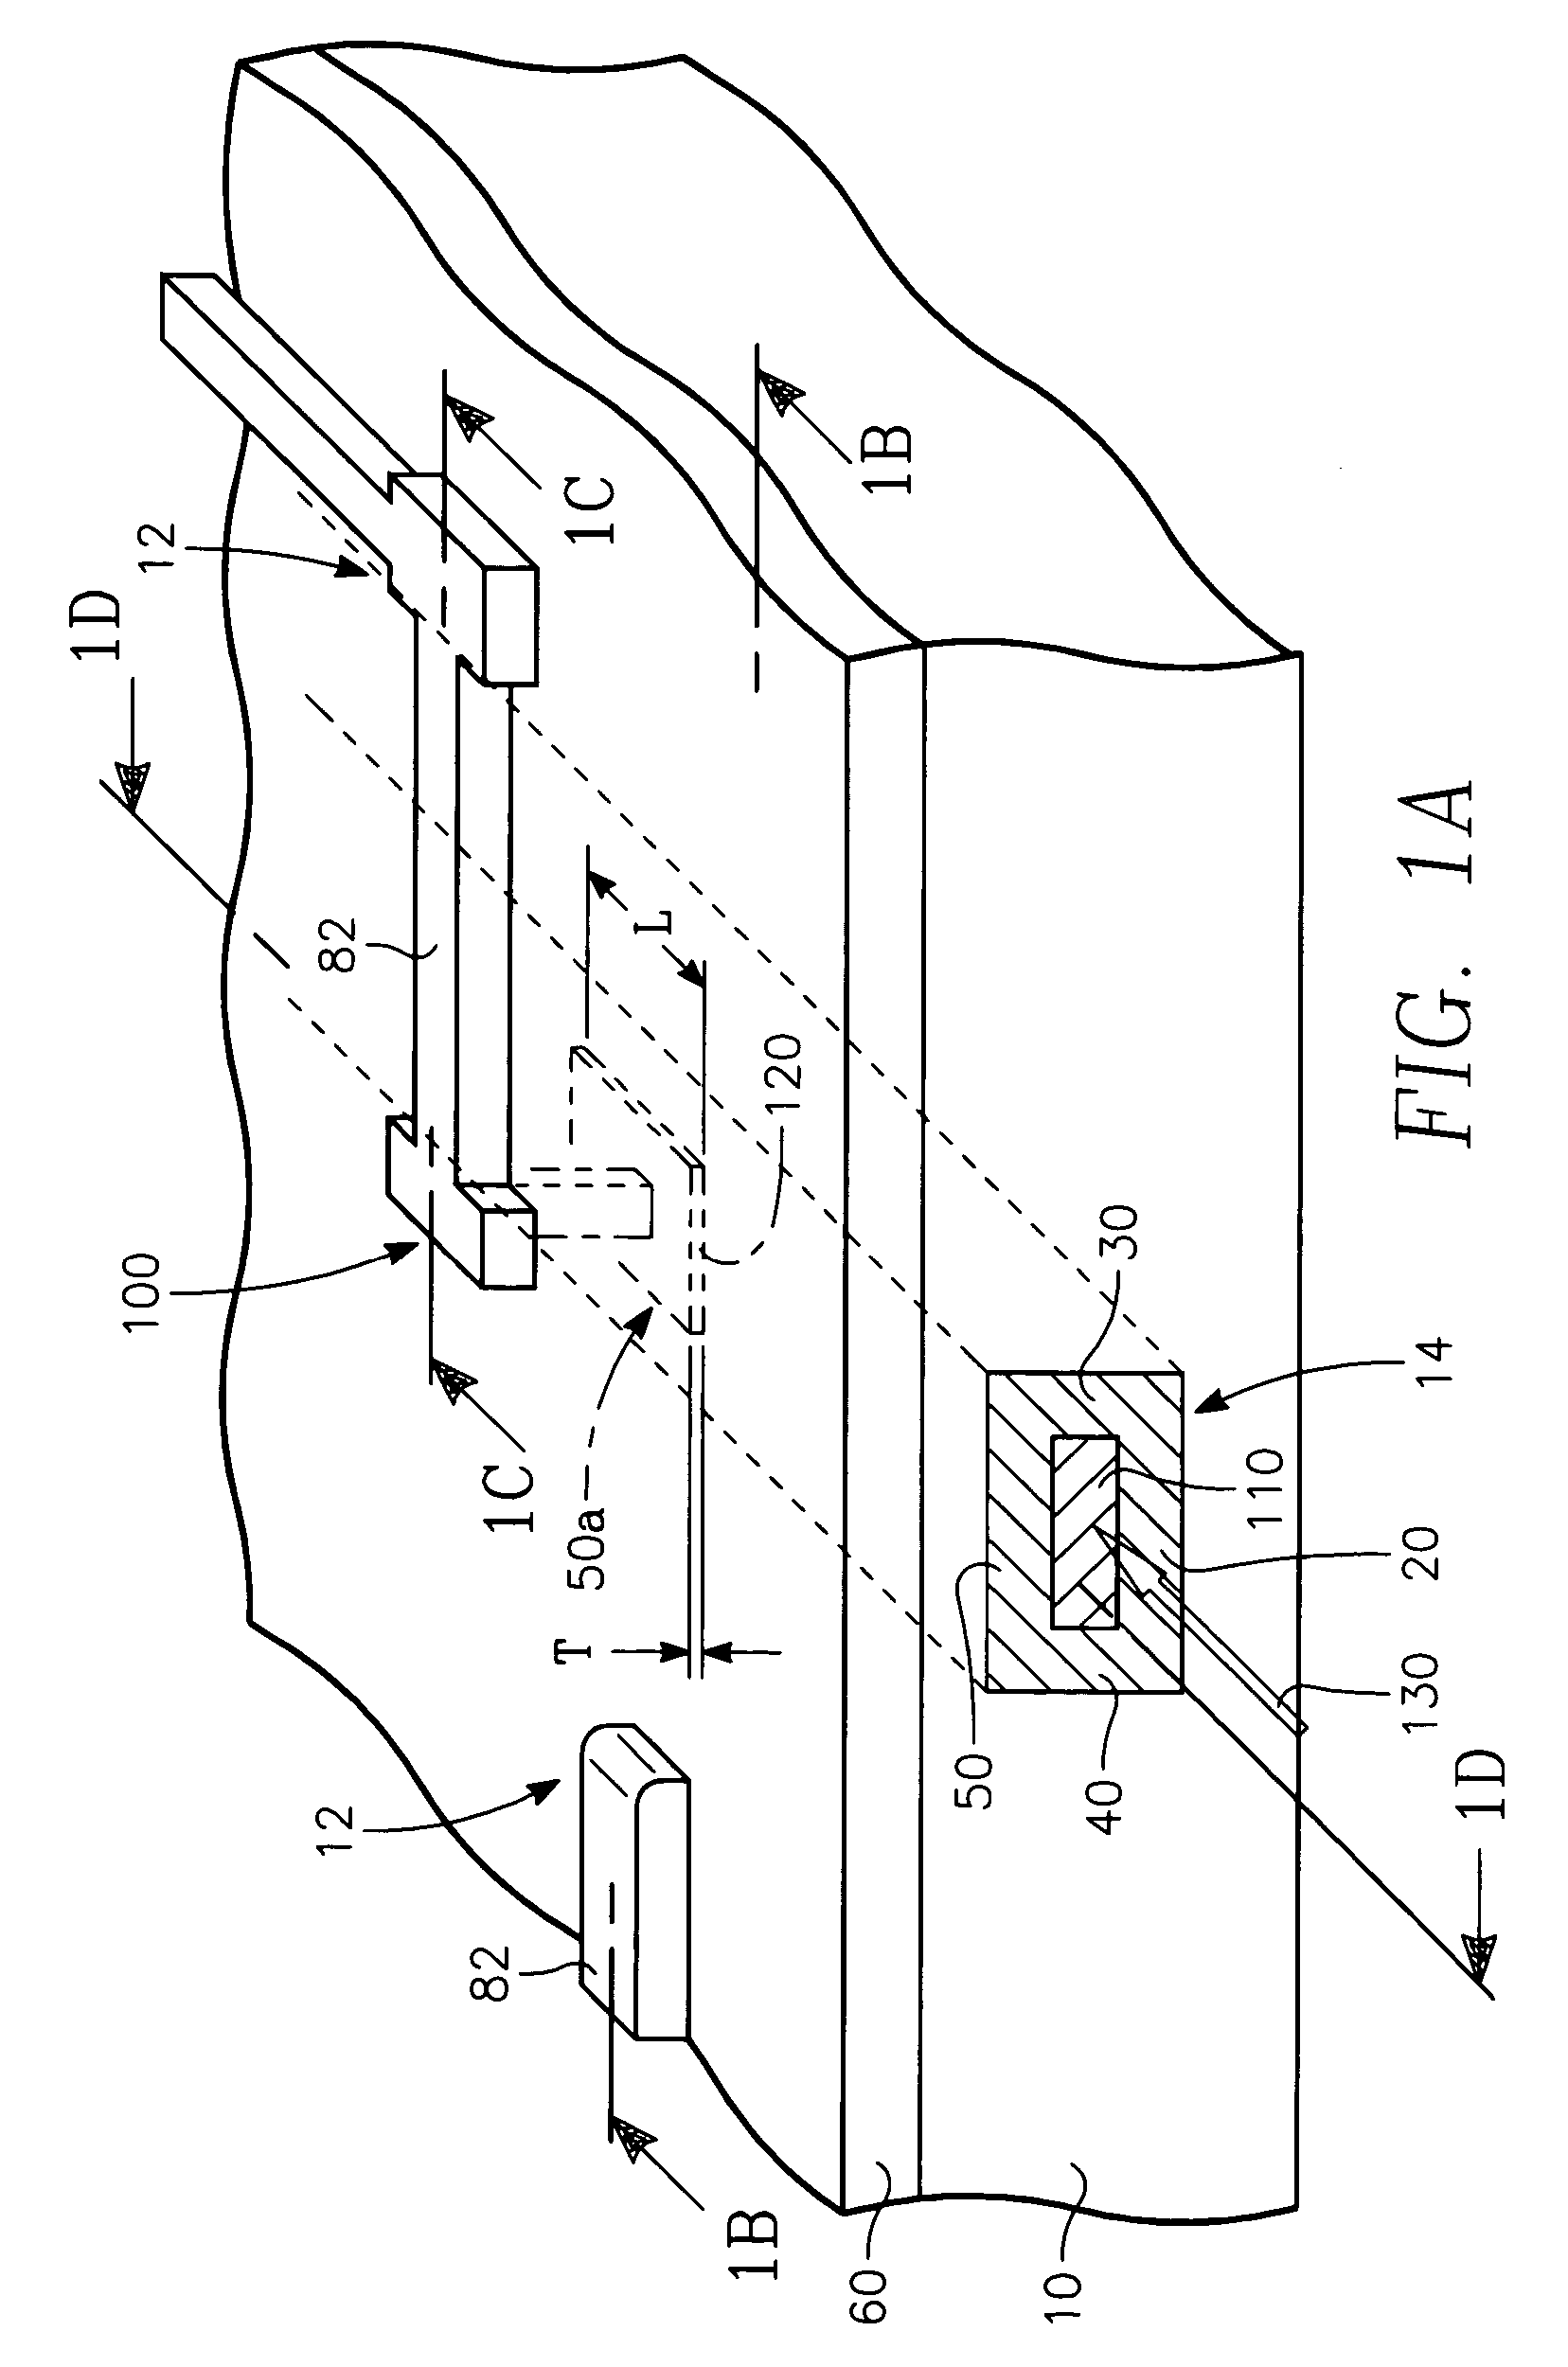 Planar integrated circuit including a plasmon waveguide-fed Schottky barrier detector and transistors connected therewith